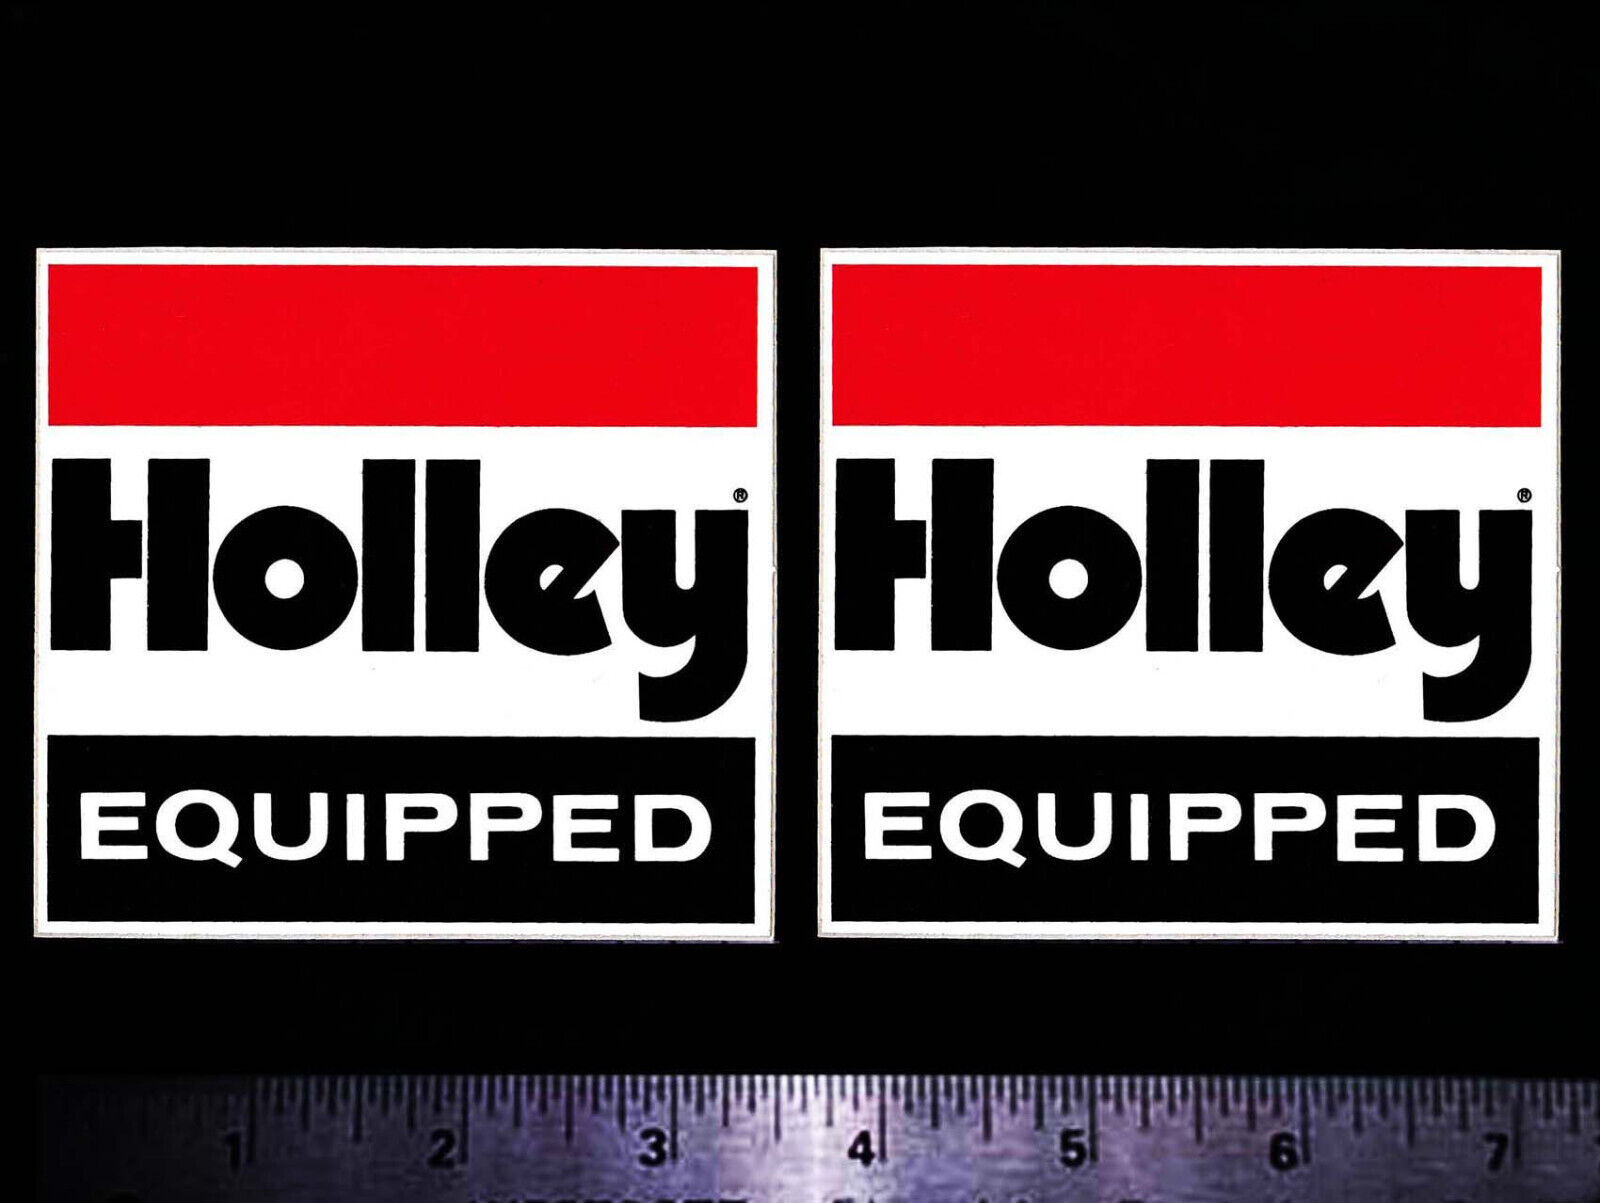 HOLLEY Equipped - Set of 2 Original Vintage Racing Decals/Stickers - 3.50 inch